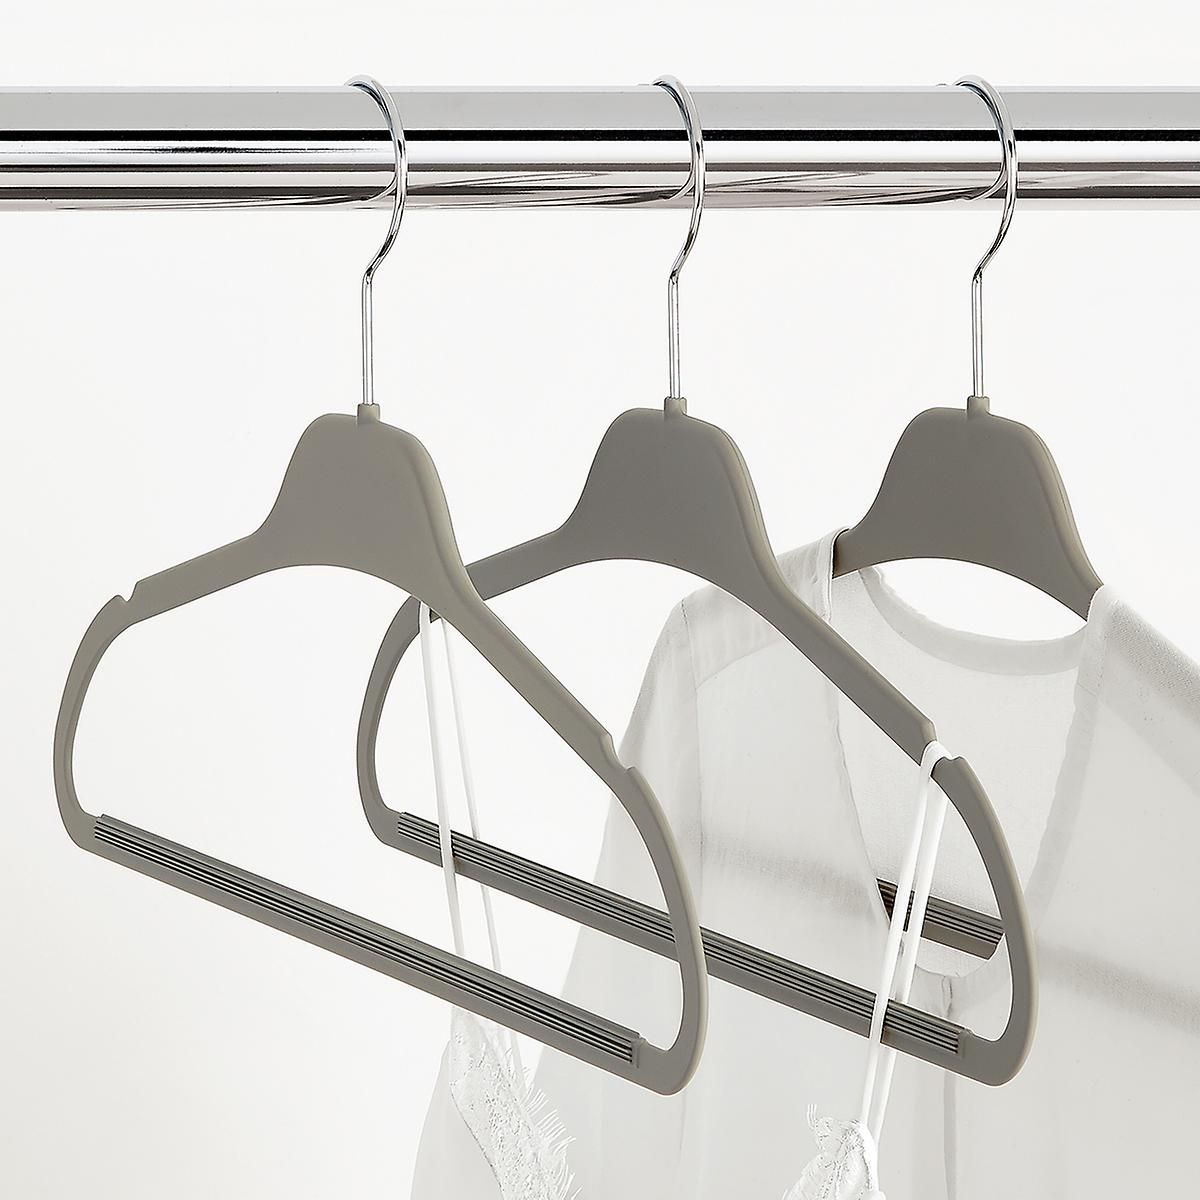 Grey Non-Slip Rubberized Suit Hangers Case of 40 | The Container Store